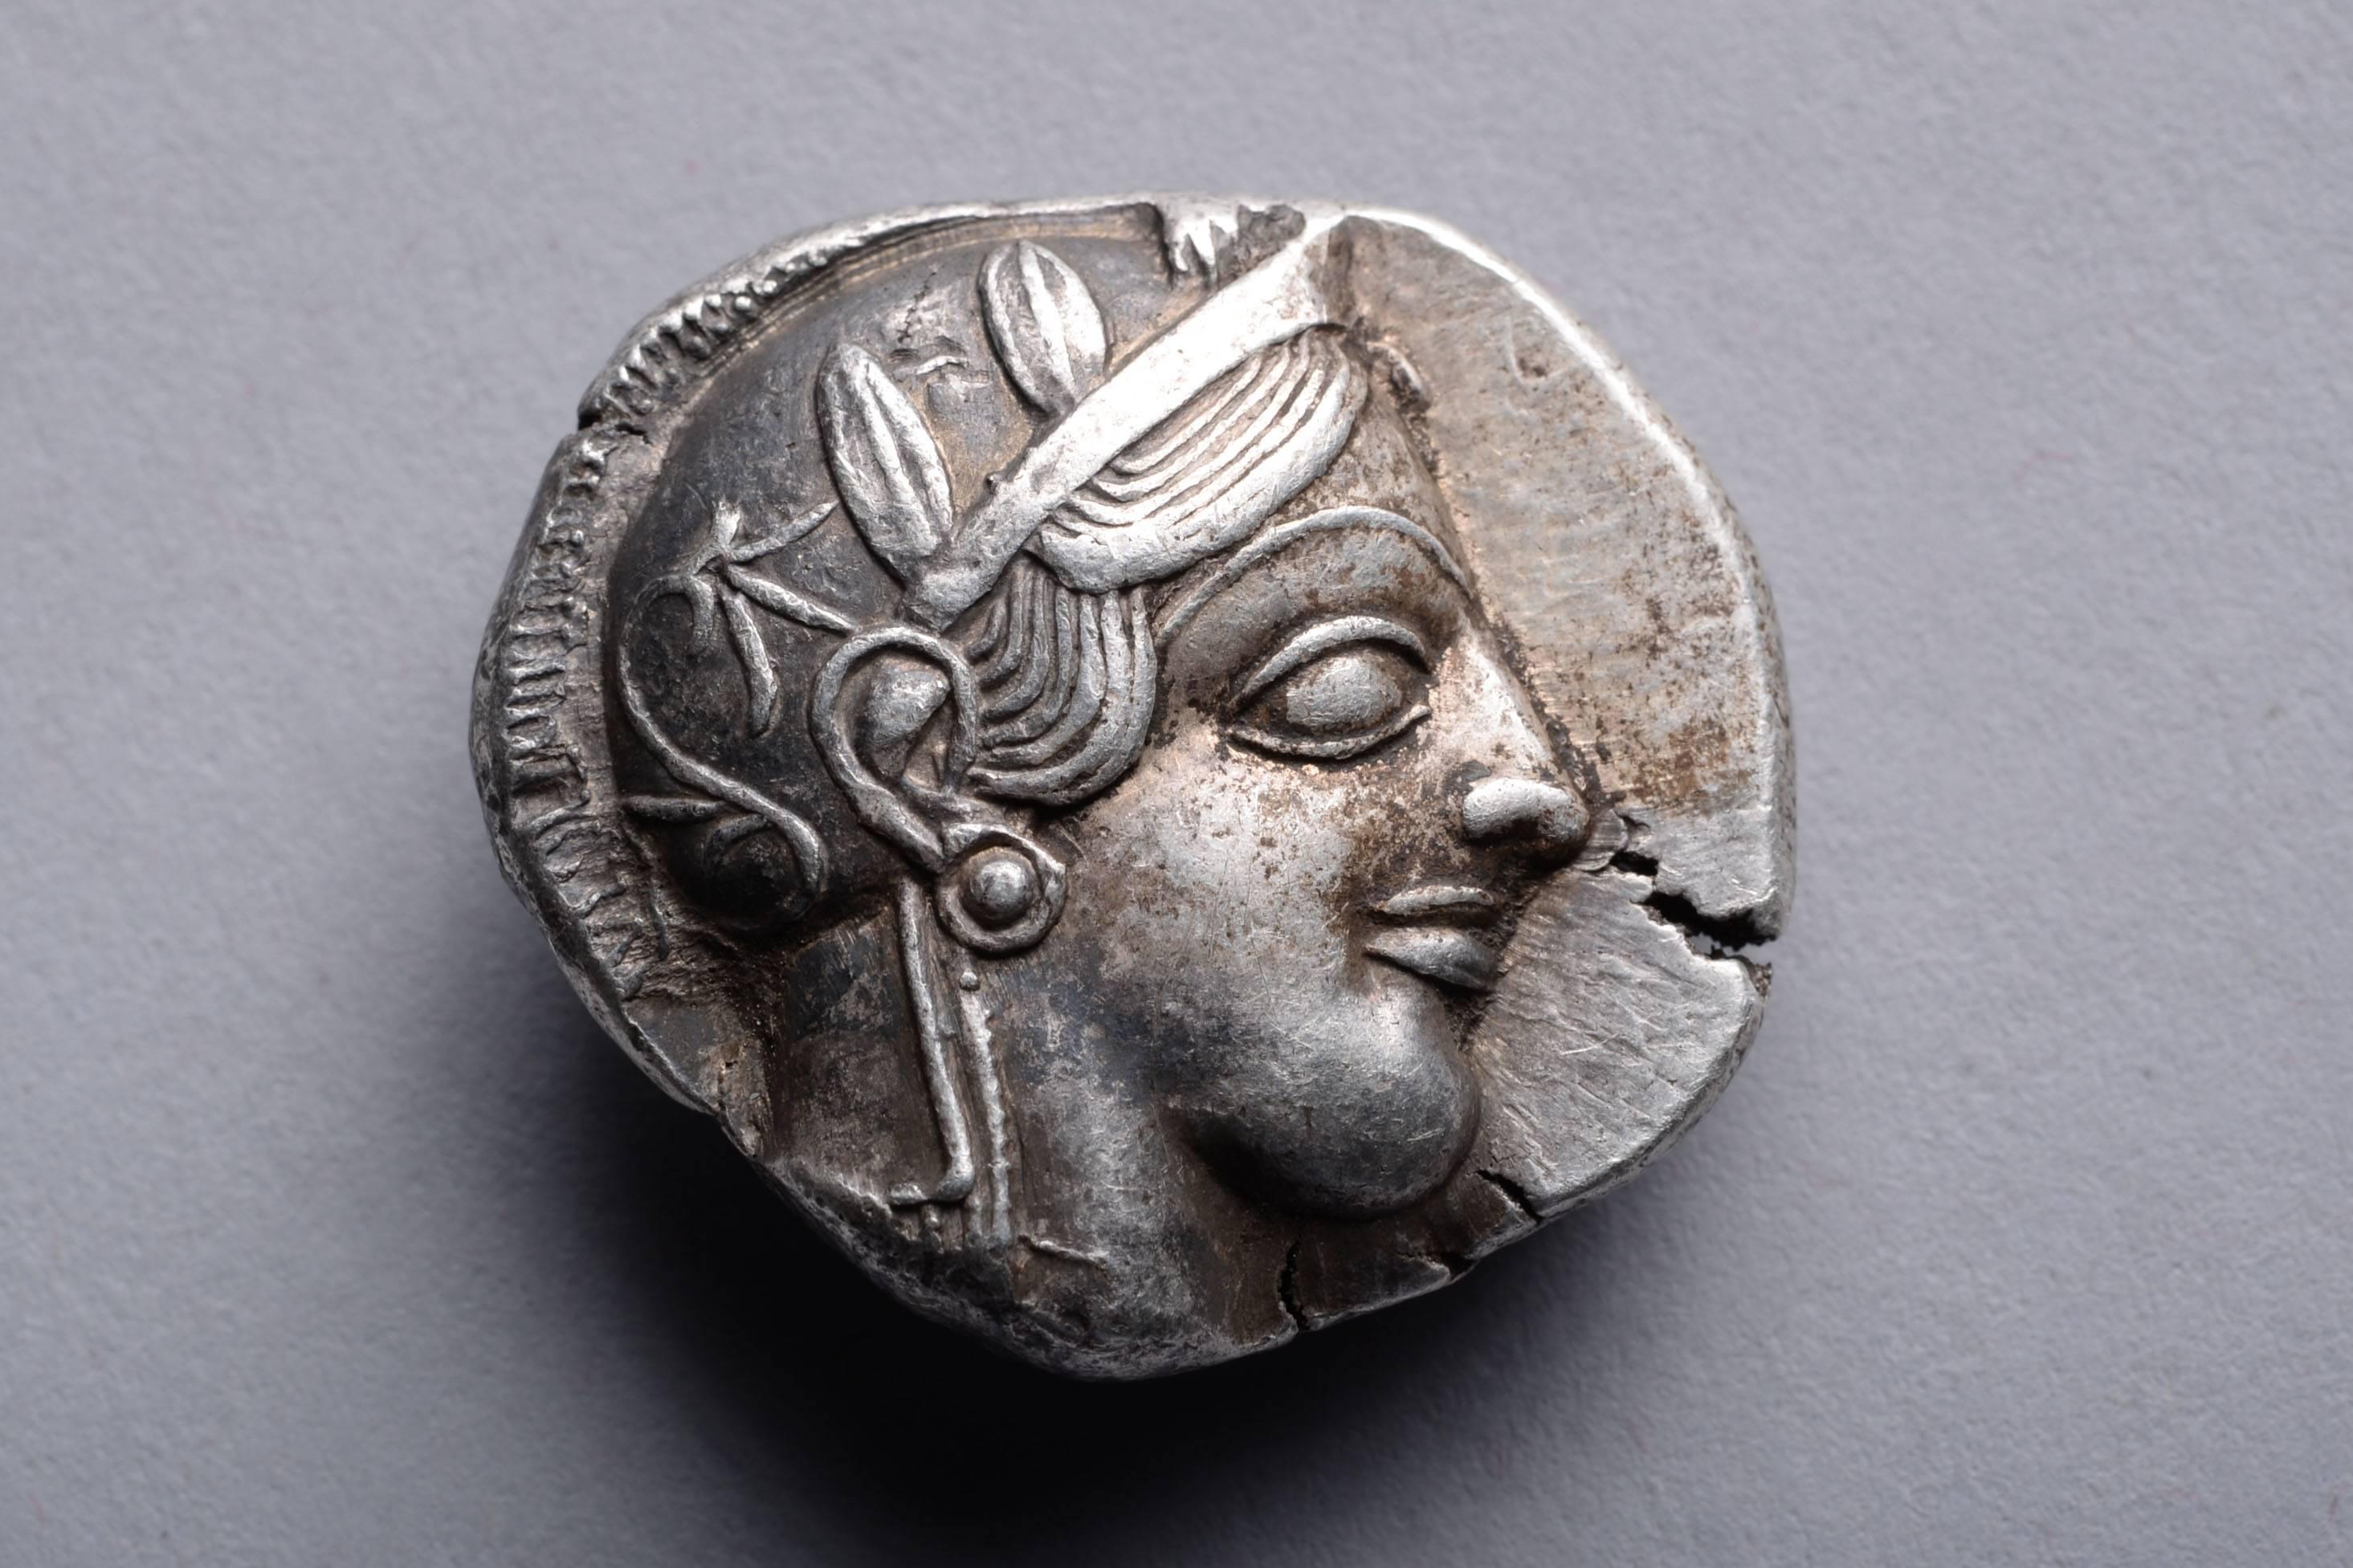 A fine style example of one of the most iconic and important coin types from the ancient world. A silver tetradrachm from Athens, struck circa 454-404 BC.

The obverse depicts Athena, patron to Athens city state. She wears a helmet ornamented with